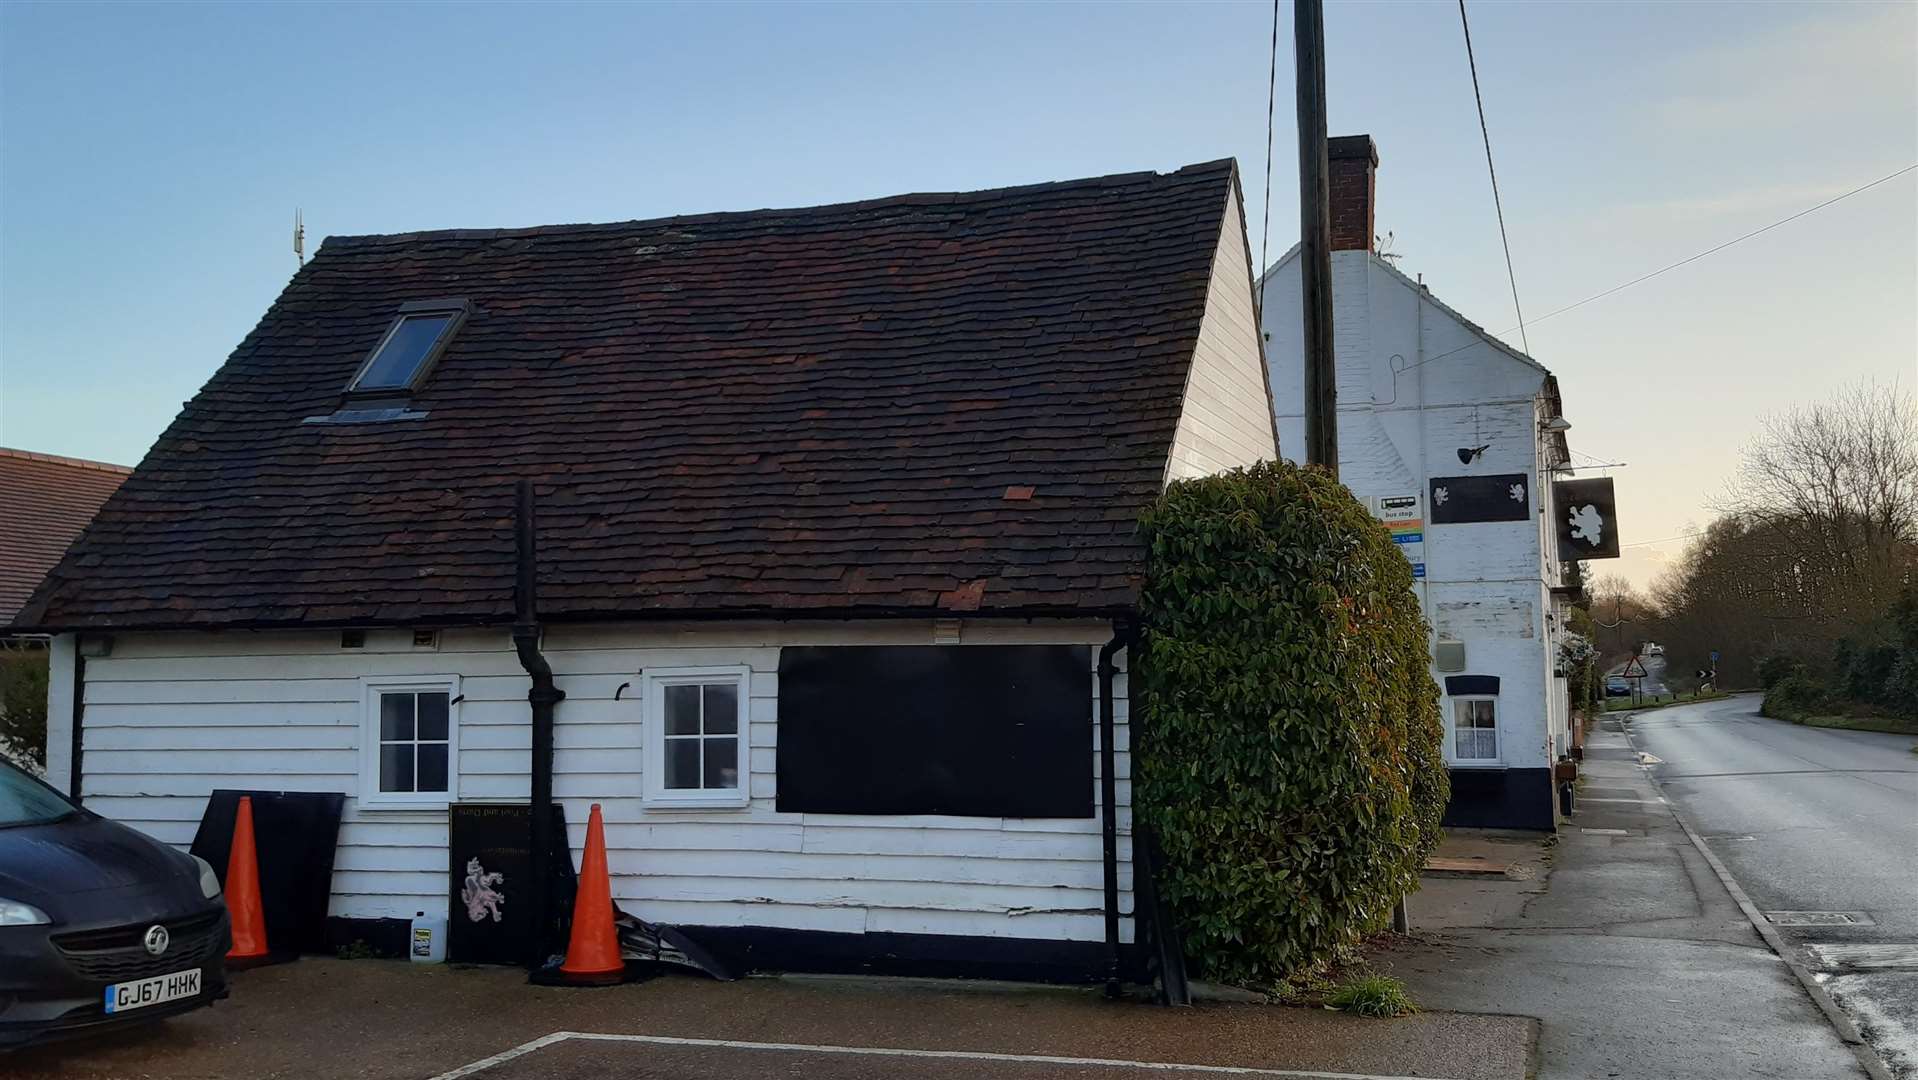 Permission has been granted to change an outbuilding at the pub into a shop selling guns and ammunition